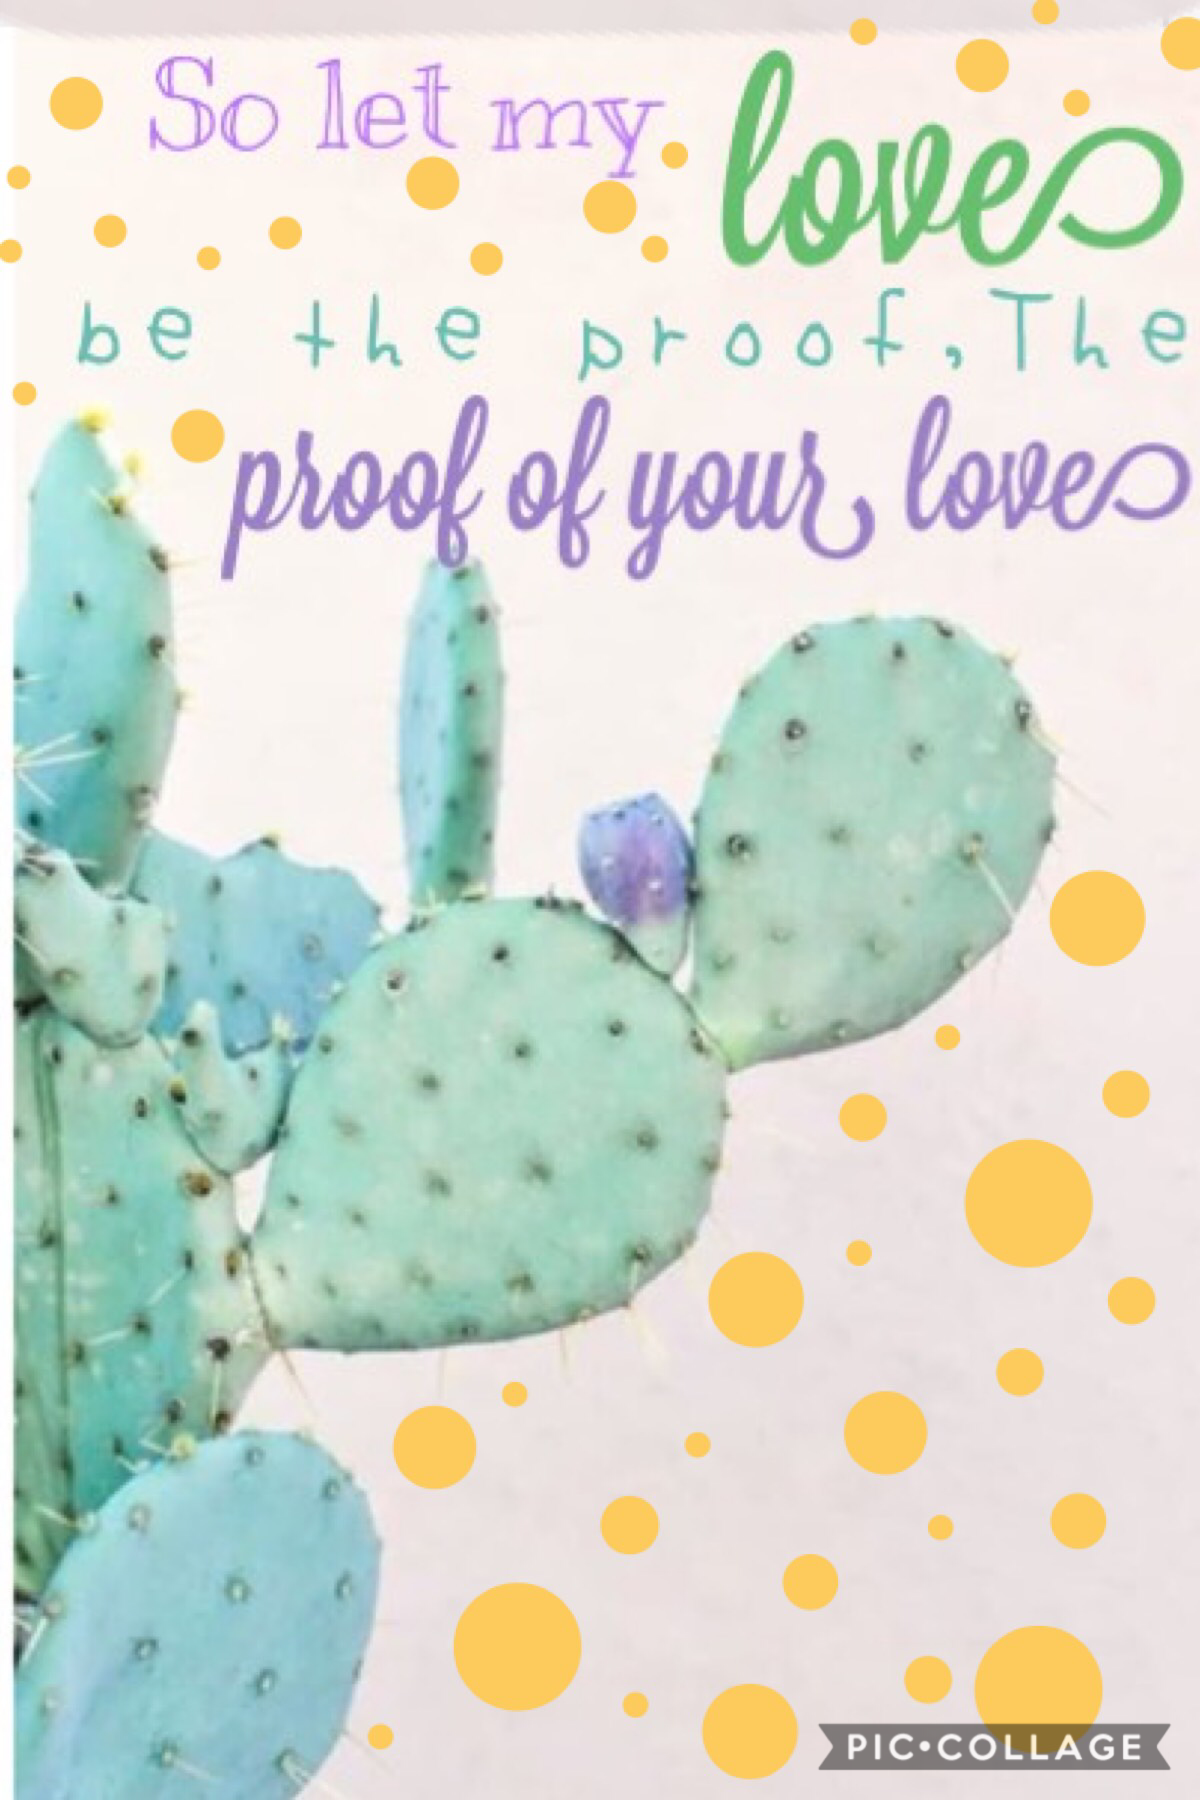 “Proof of Your Love” a wonderful Christian song!! ✝️ Guess what!! I finally figured out how to use Phonto!! Special thanks to The_Divergent-Tribute and Hopeful_Editor14 for helping me!! ✨😆🎊🎈I will be yawing PC fonts and Phonto fonts now!!👍🏼